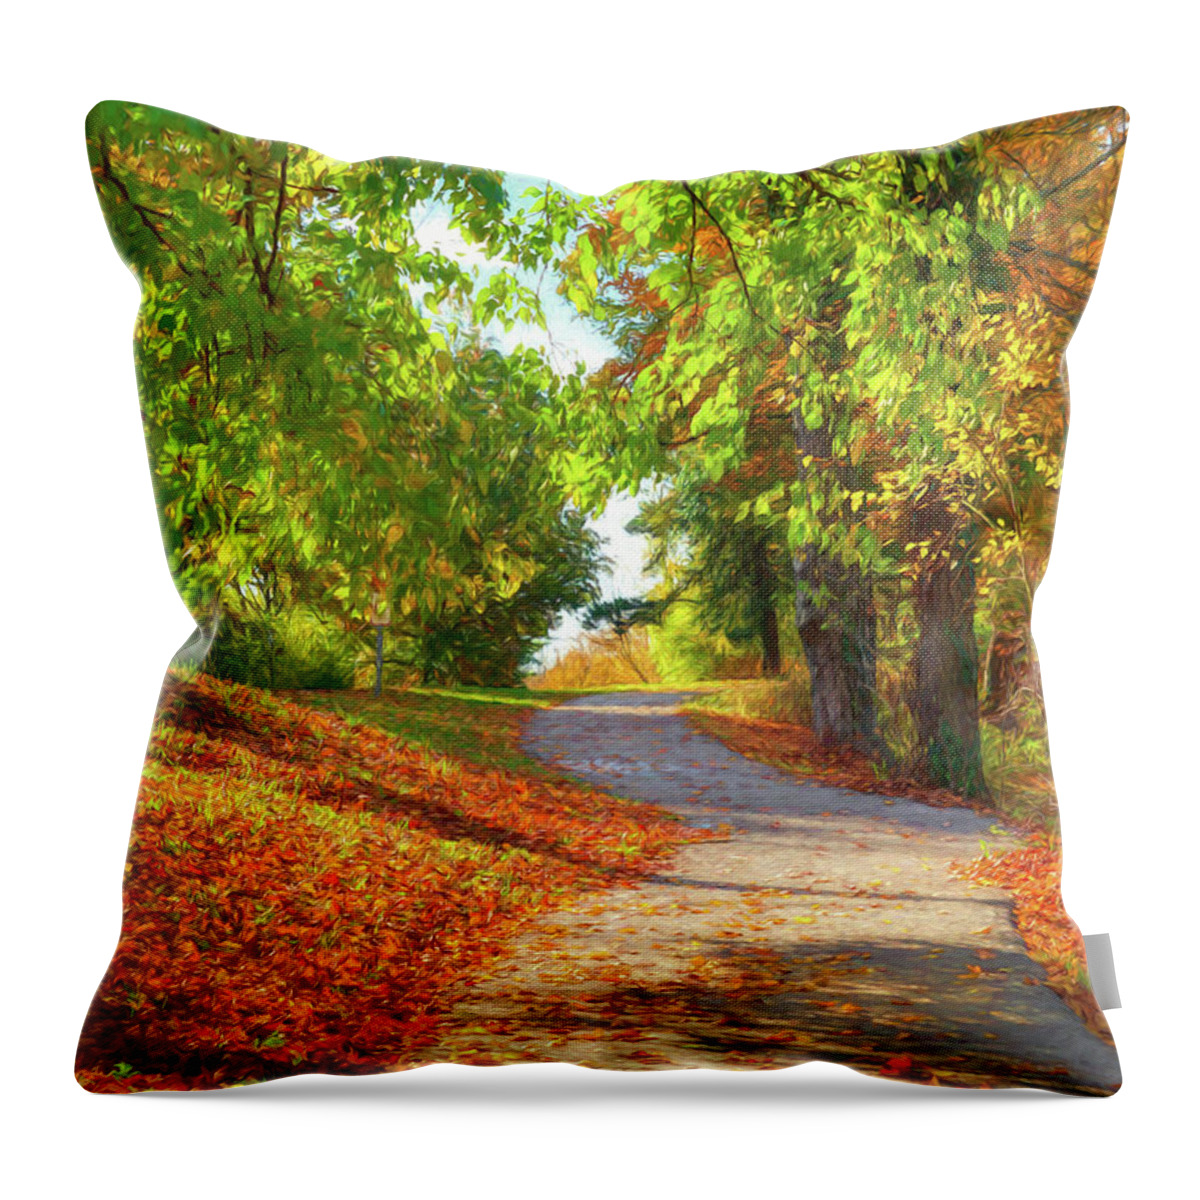 Pathway To Autumn Throw Pillow featuring the photograph Pathway To Autumn # 3 by Mel Steinhauer